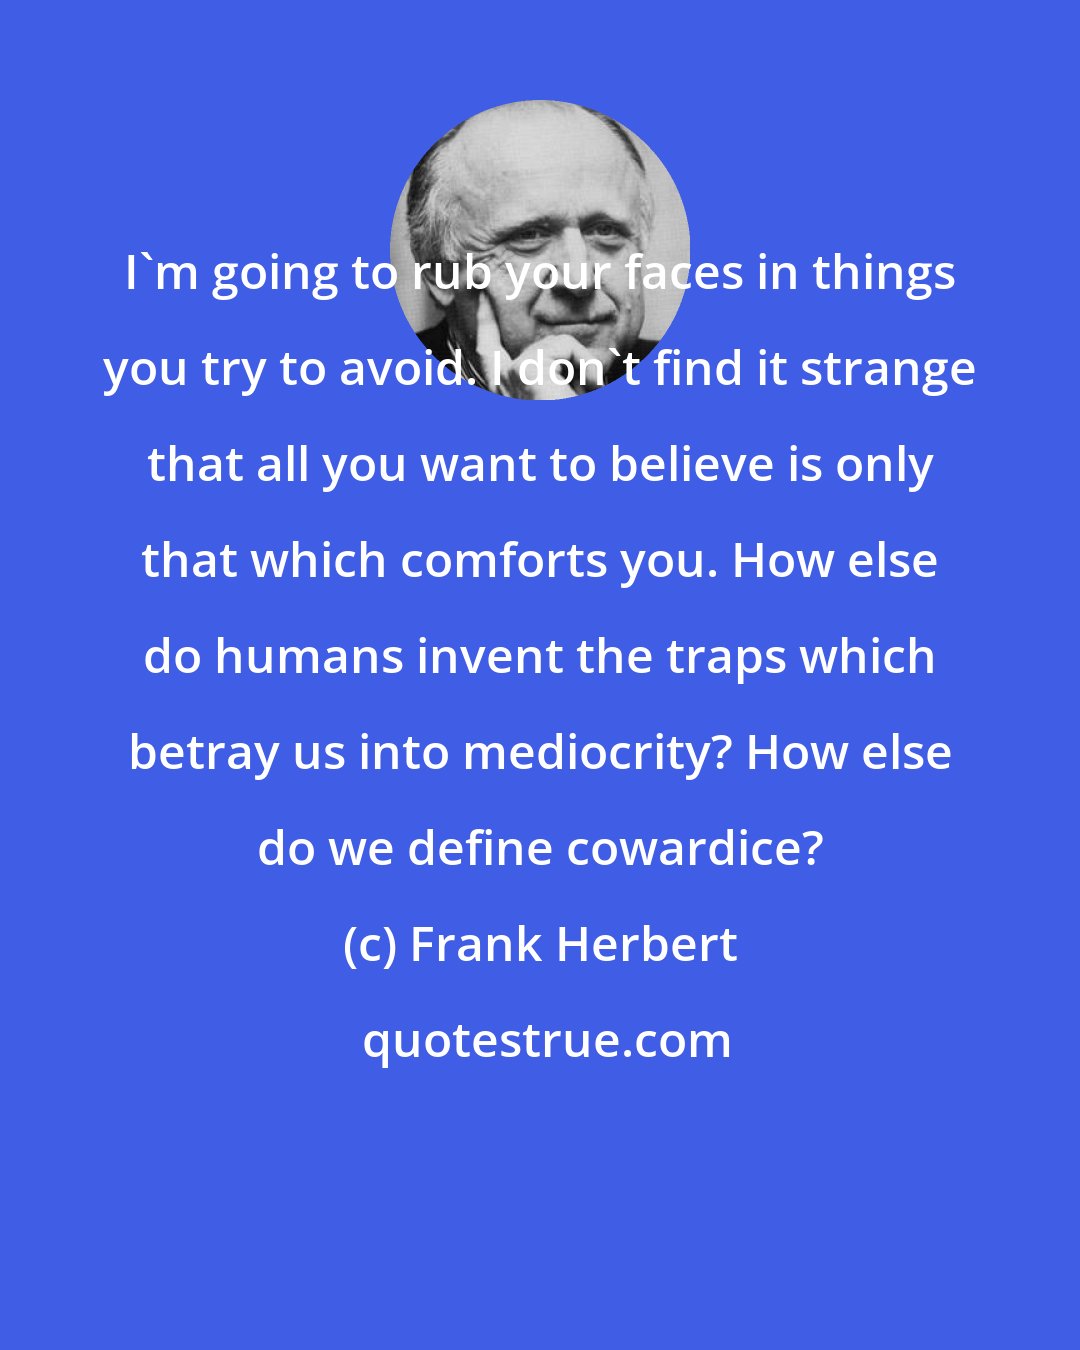 Frank Herbert: I'm going to rub your faces in things you try to avoid. I don't find it strange that all you want to believe is only that which comforts you. How else do humans invent the traps which betray us into mediocrity? How else do we define cowardice?